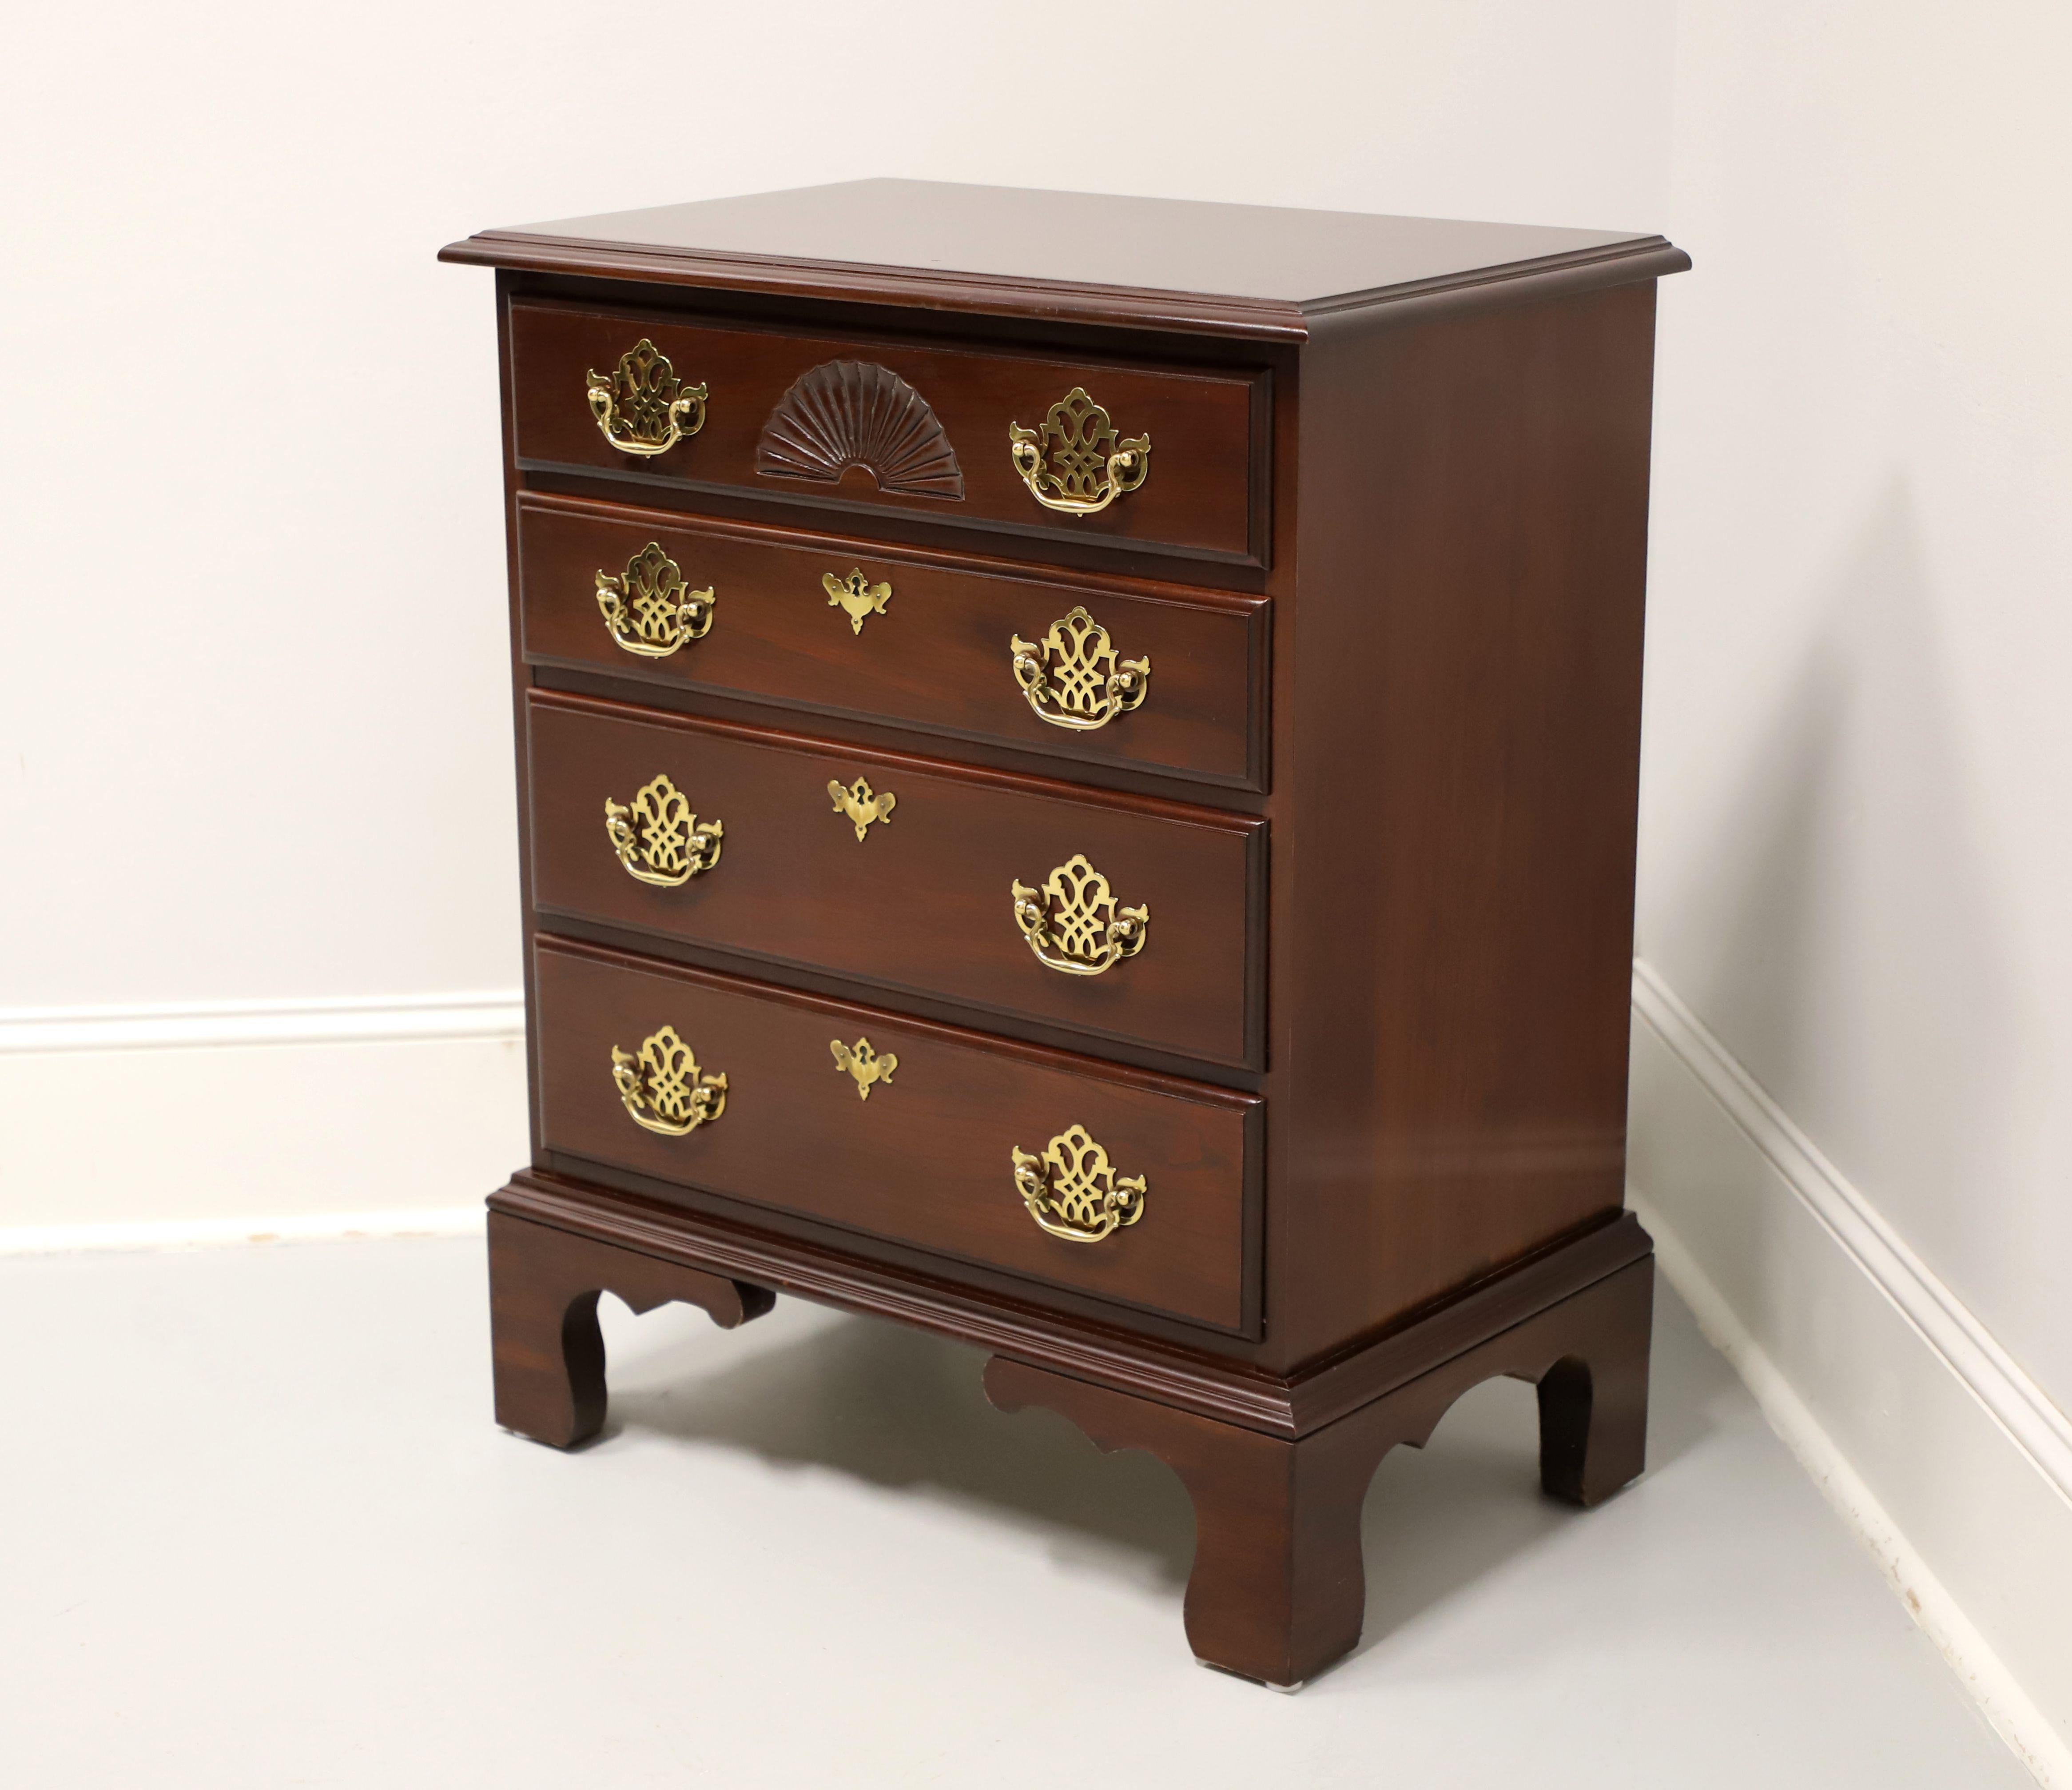 lillian russell cherry bedroom furniture